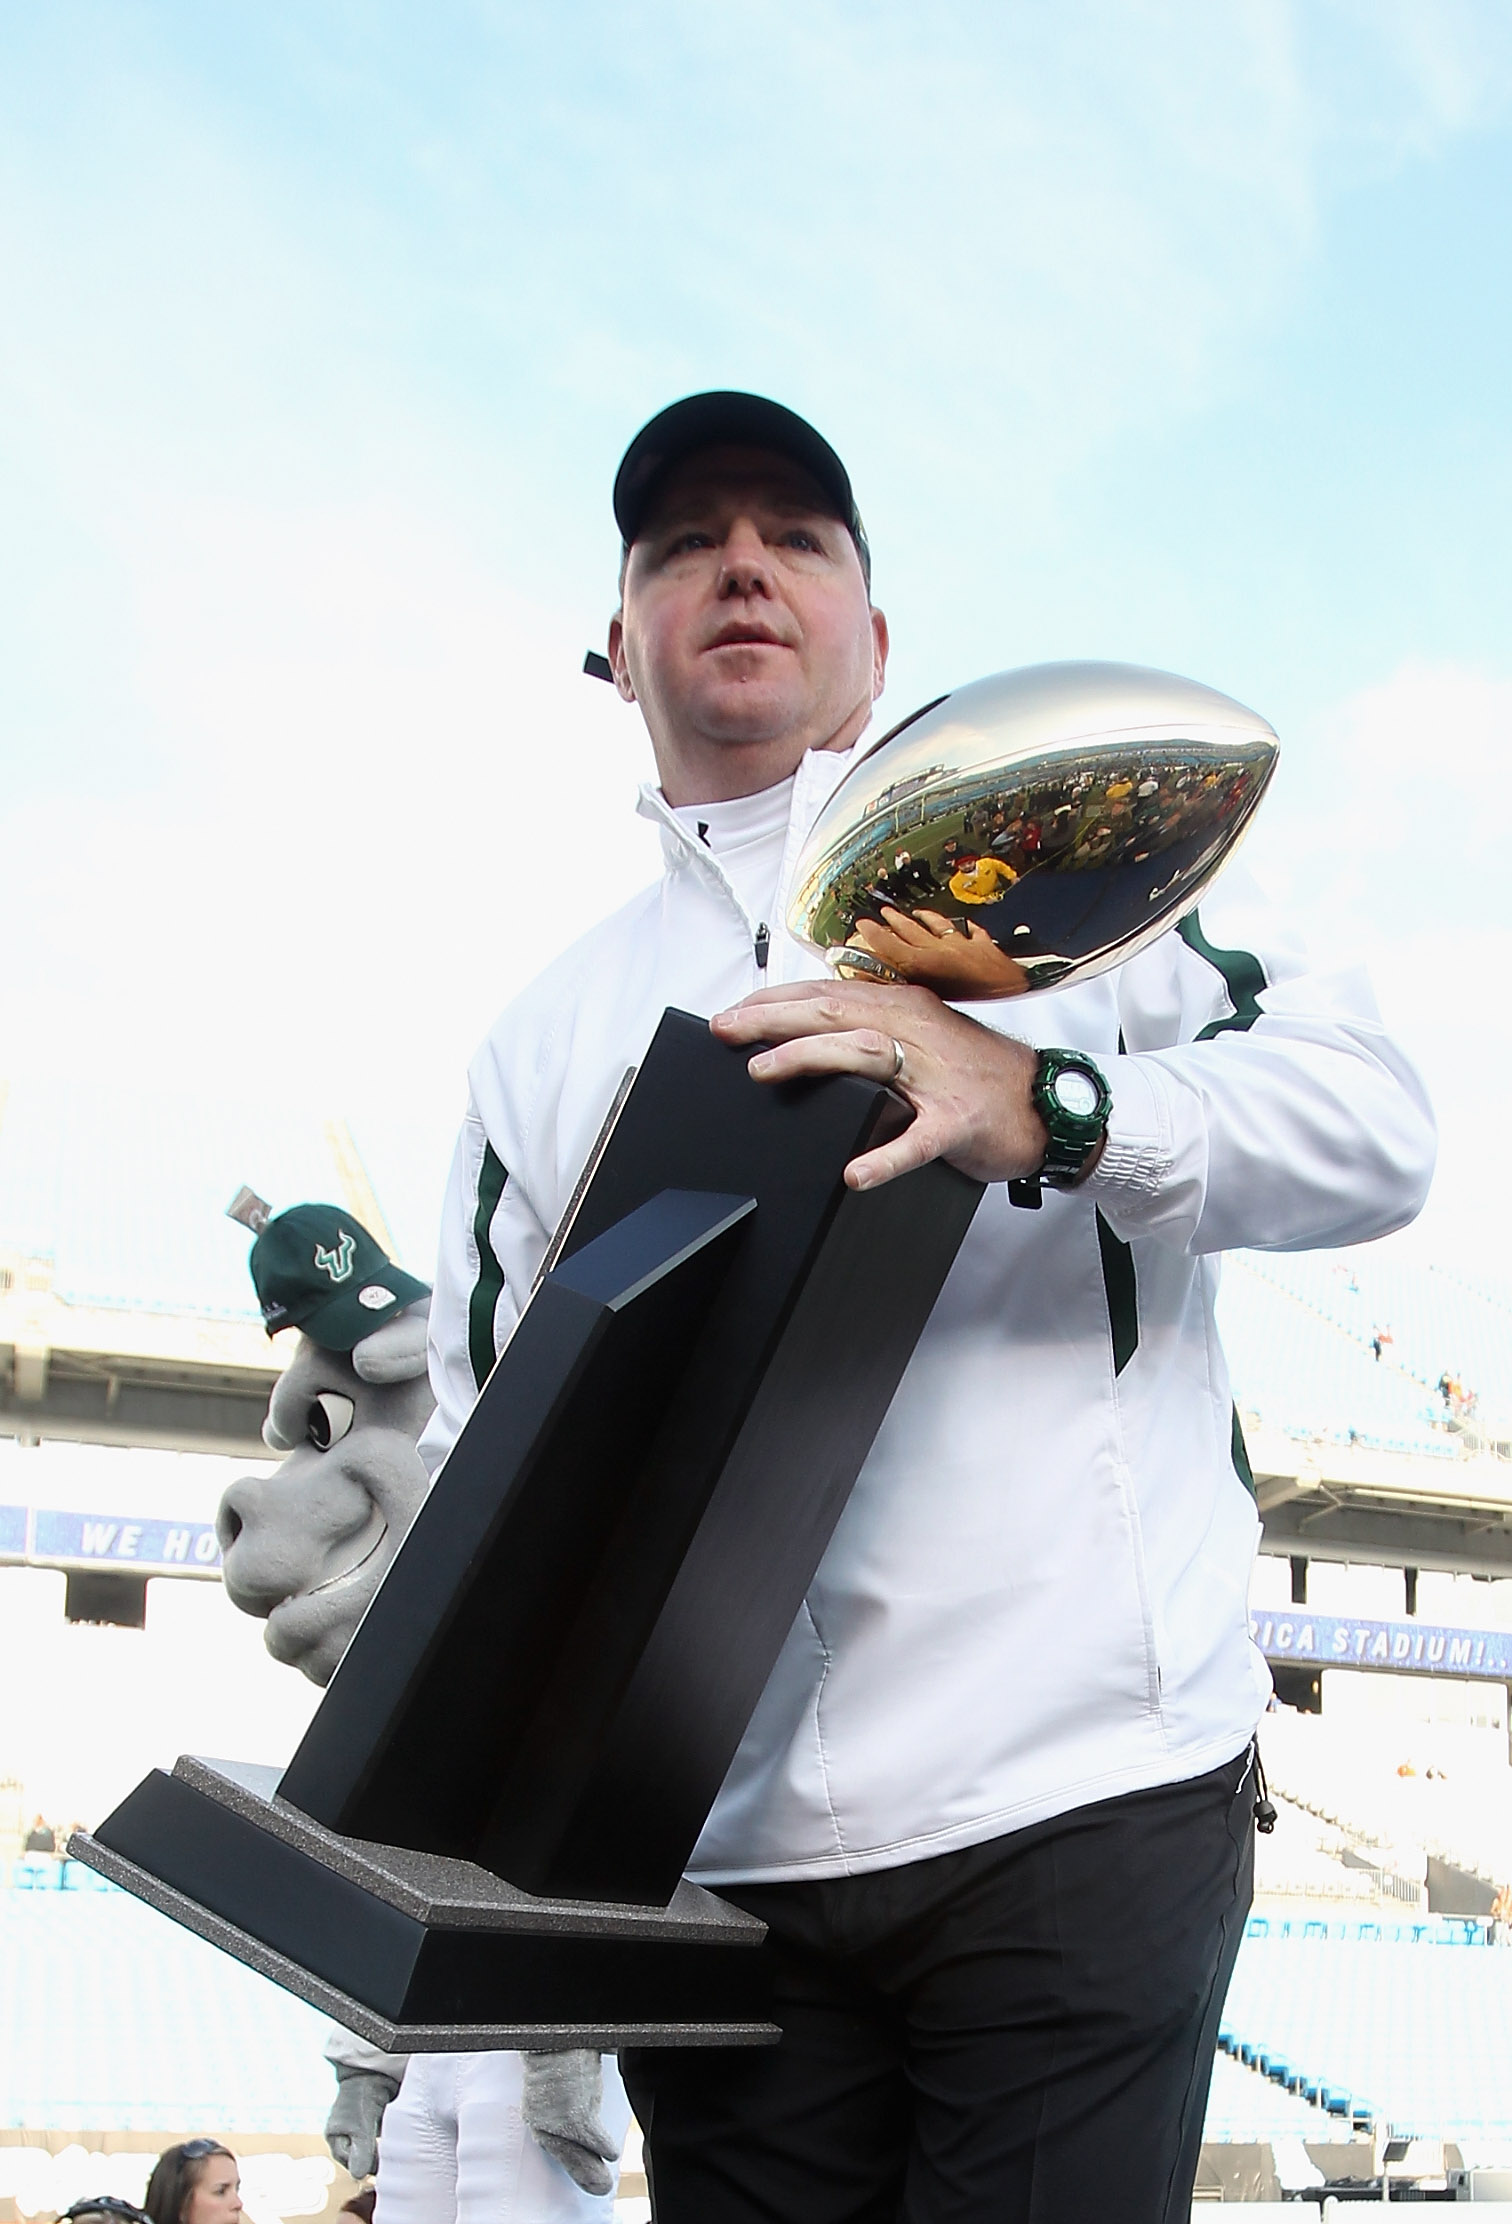 CHARLOTTE, NC - DECEMBER 31:  Head coach Skip Holtz of the USF Bulls stands with the trophy after a 31-26 victory over the Clemson Tigers at Bank of America Stadium on December 31, 2010 in Charlotte, North Carolina.  (Photo by Streeter Lecka/Getty Images)